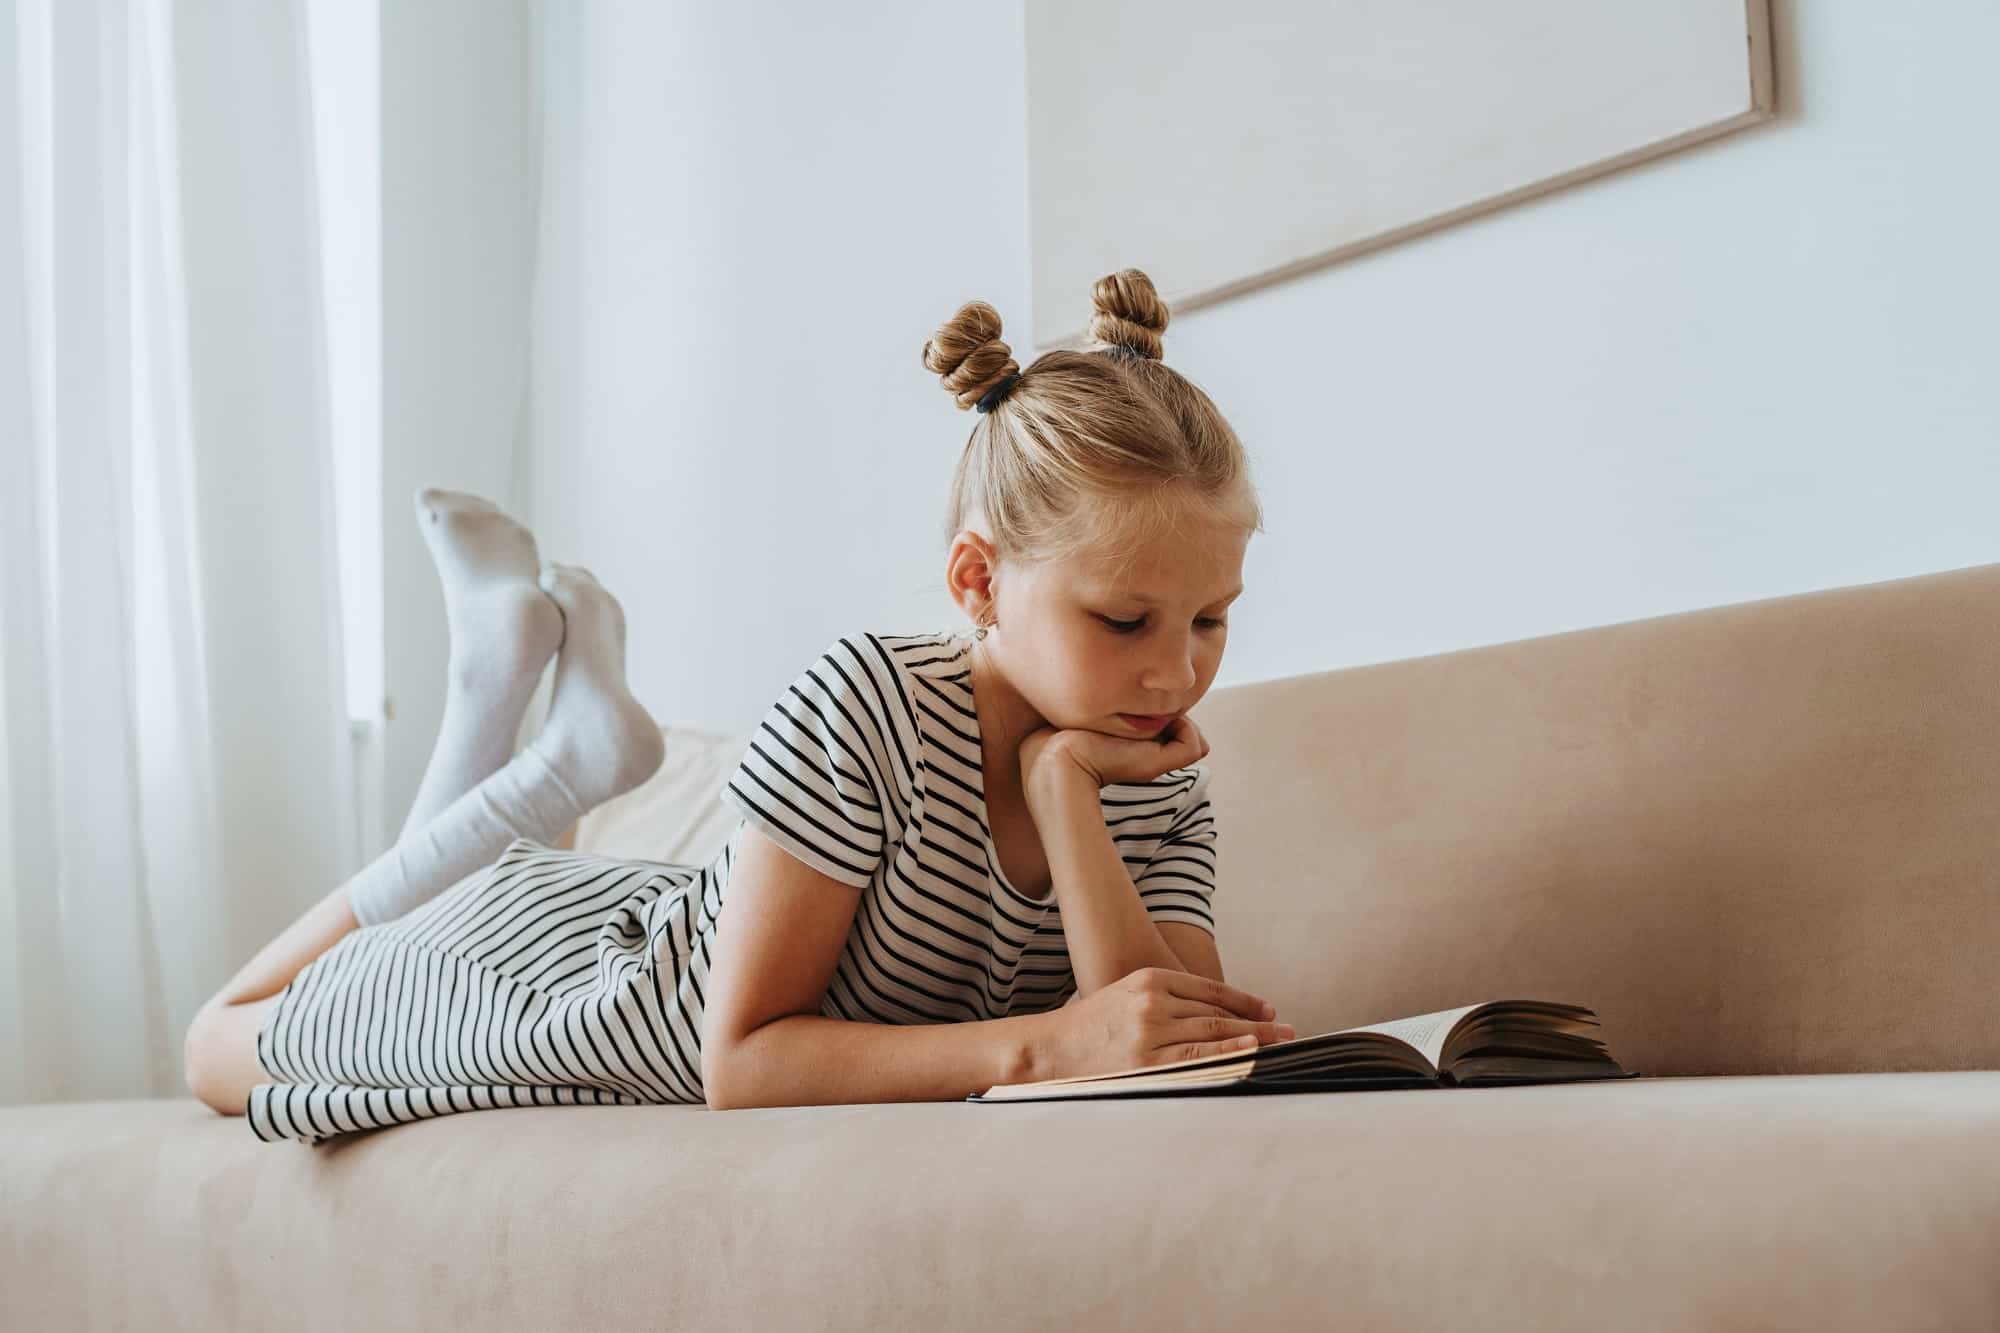 Want your child to share your love of reading? Here’s how to make it happen